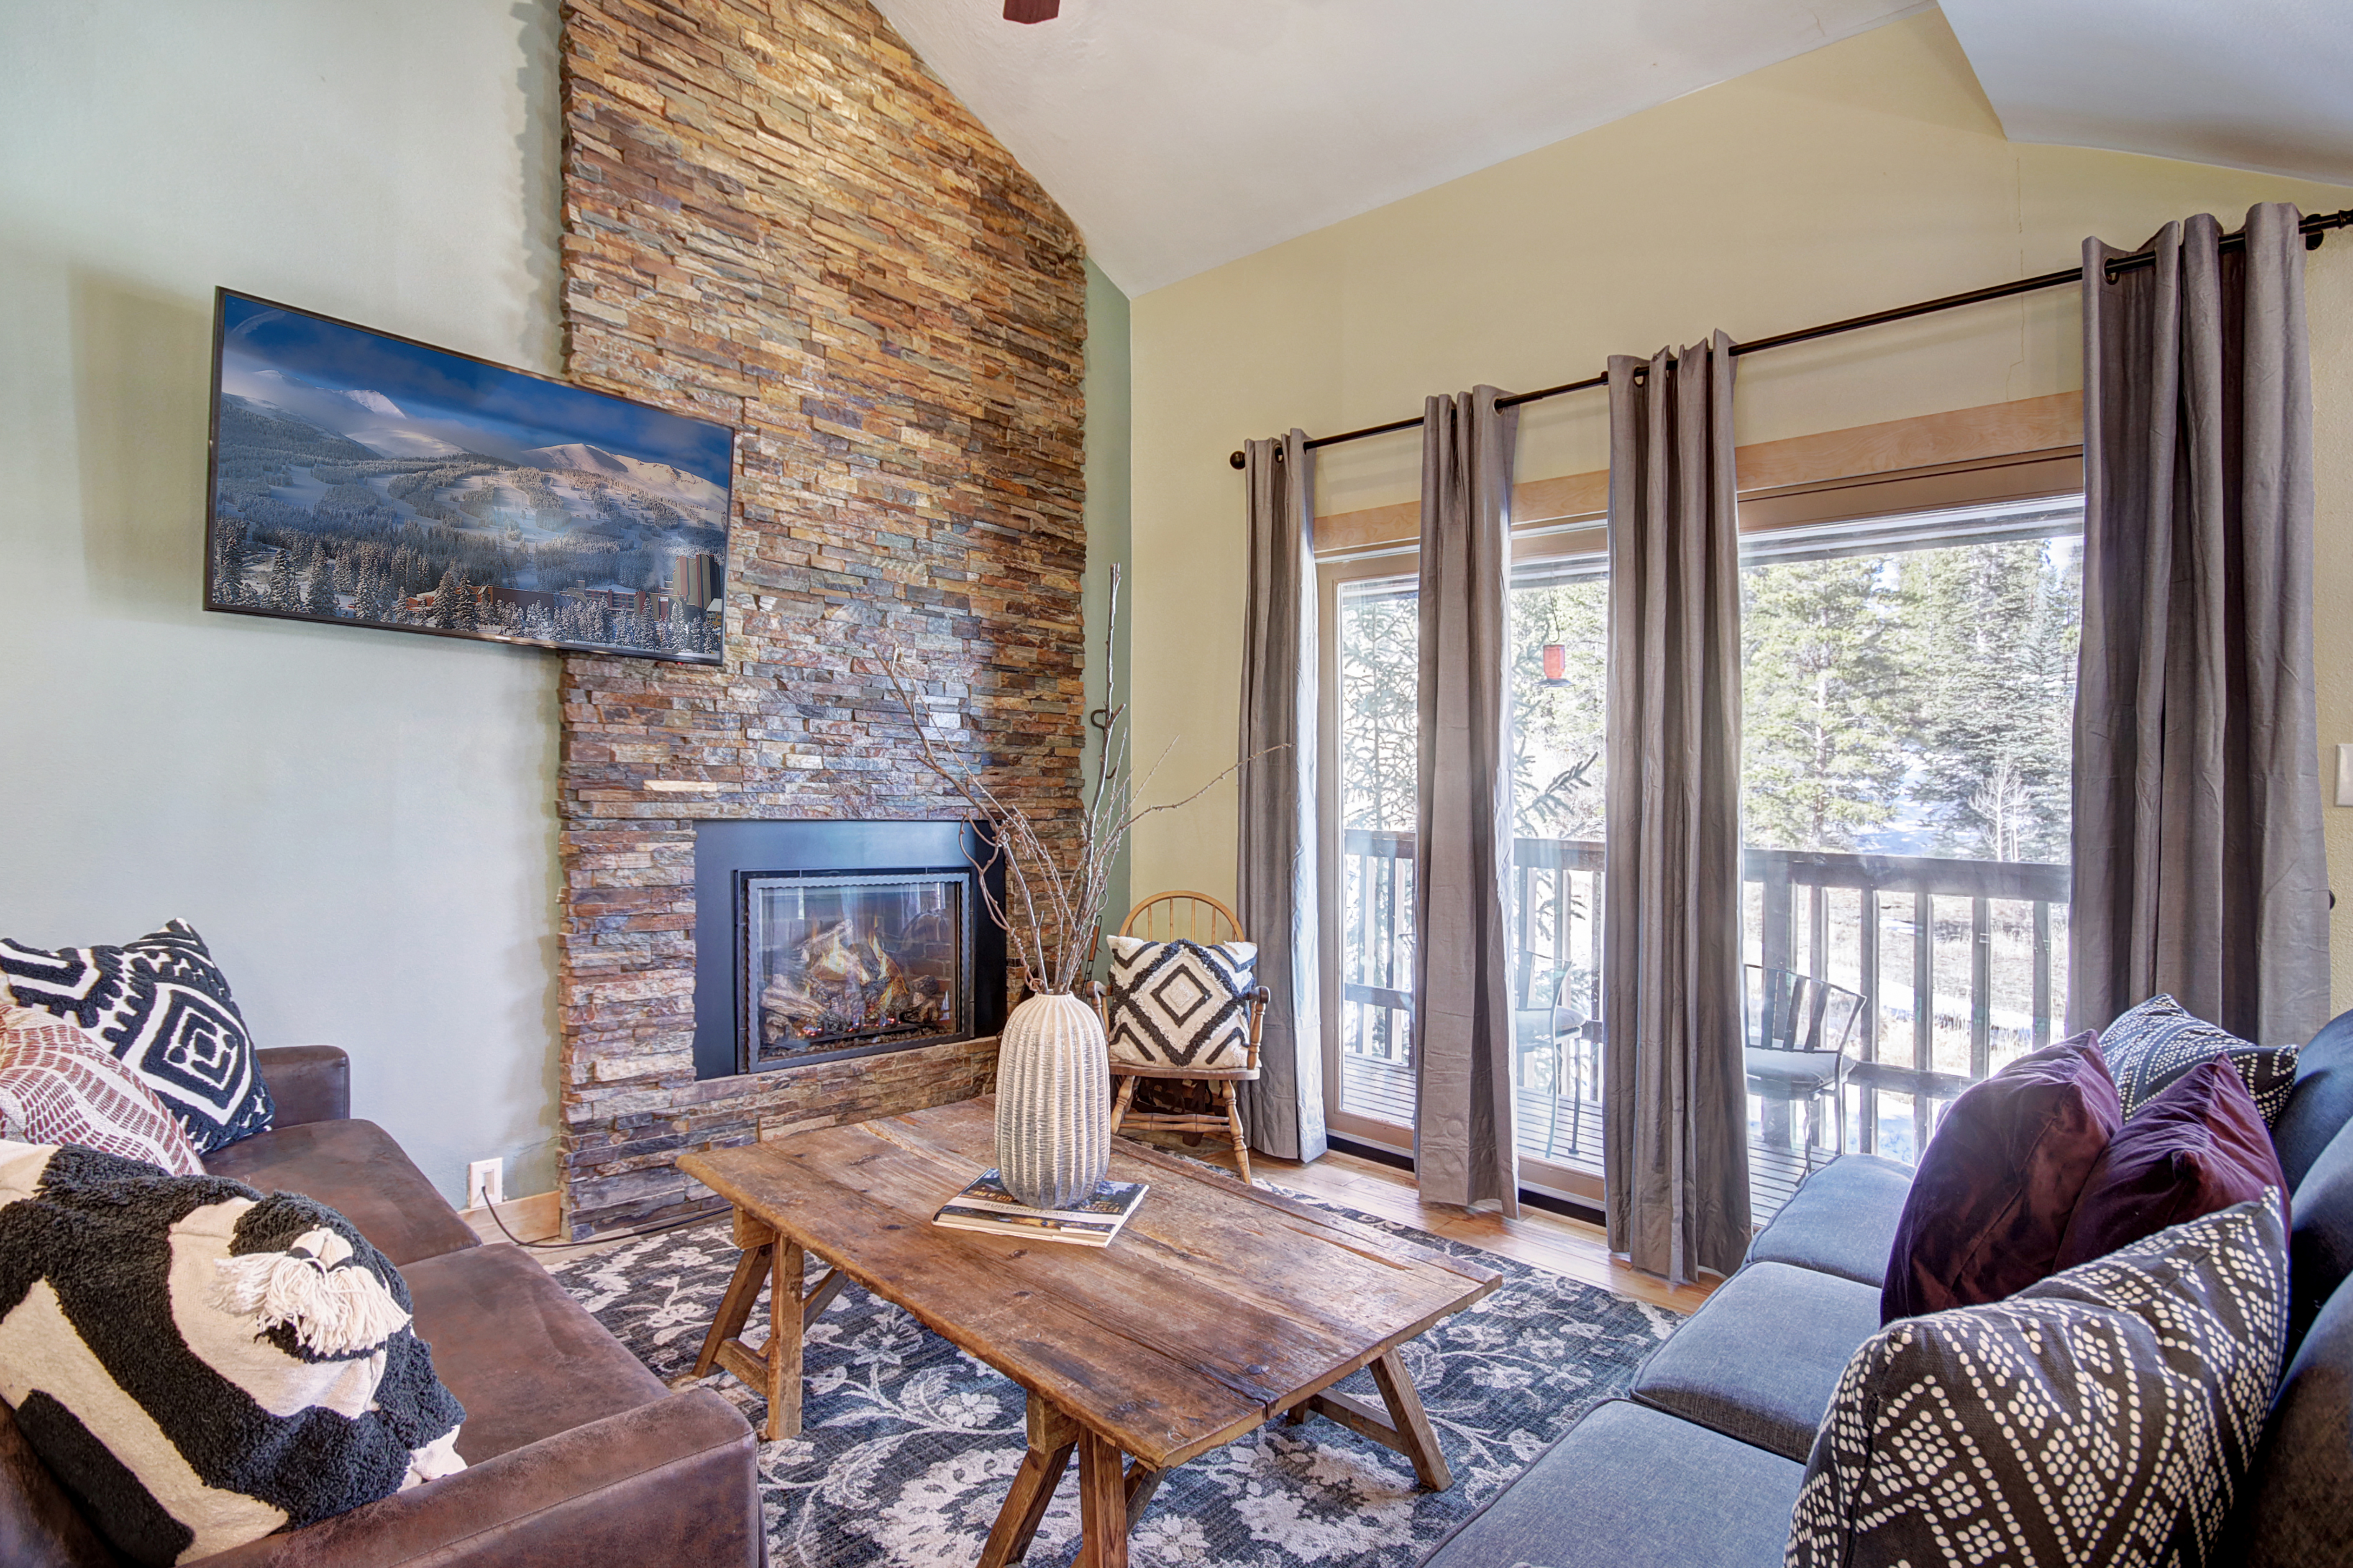 Relax by the gas fireplace after a long day on the slopes - 4 O’Clock Lodge D26 Breckenridge Vacation Rental